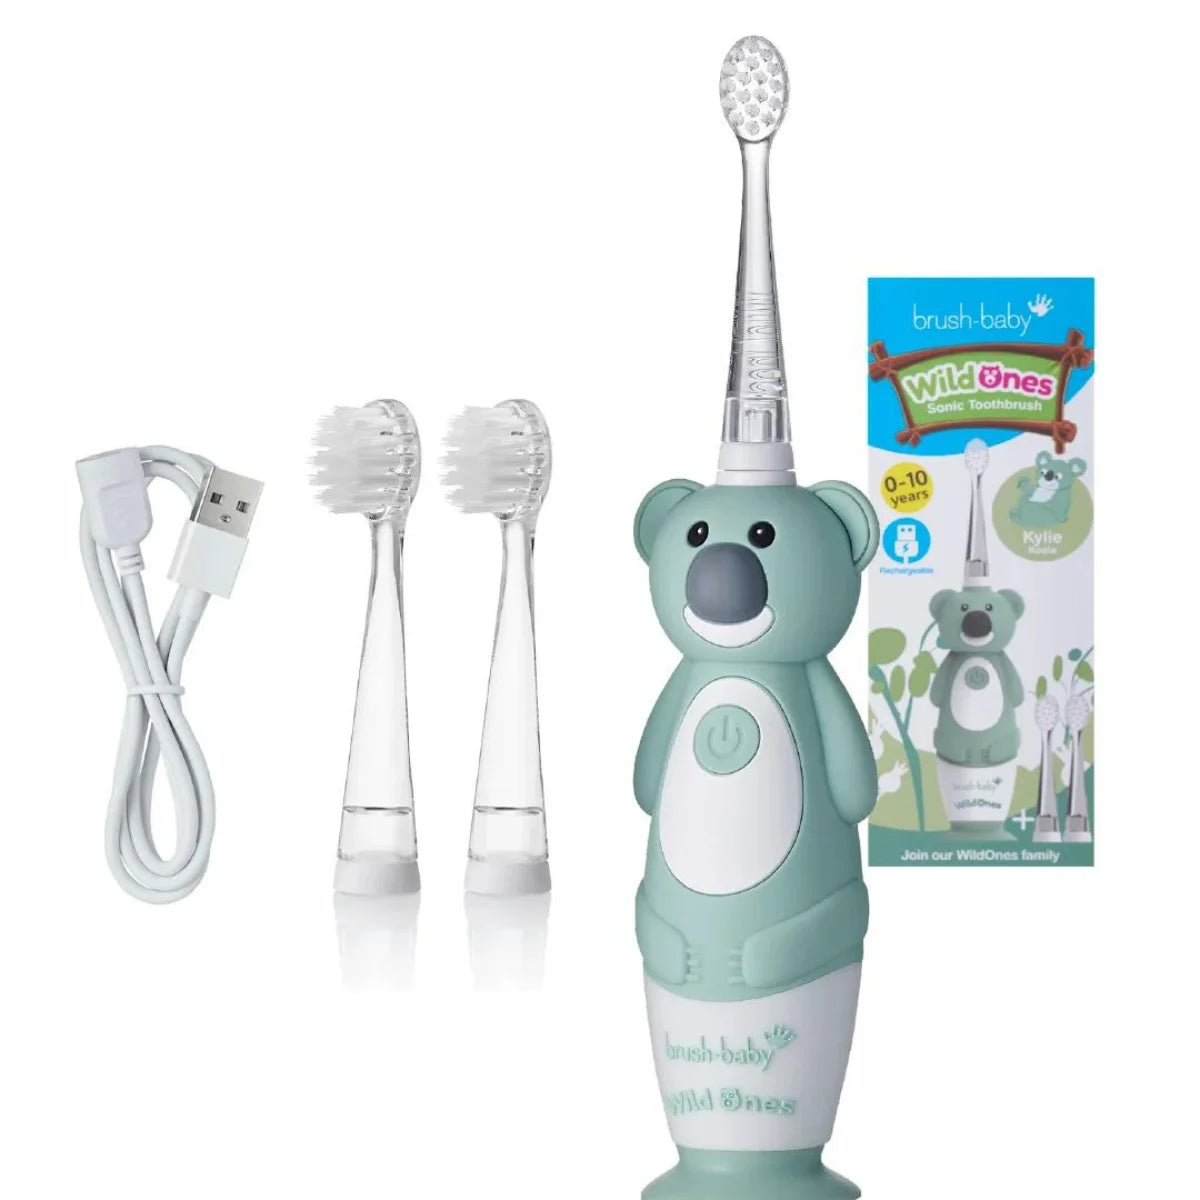 WildOnes Kylie Koala rechargeable electric childrens toothbrush in grey with white trim